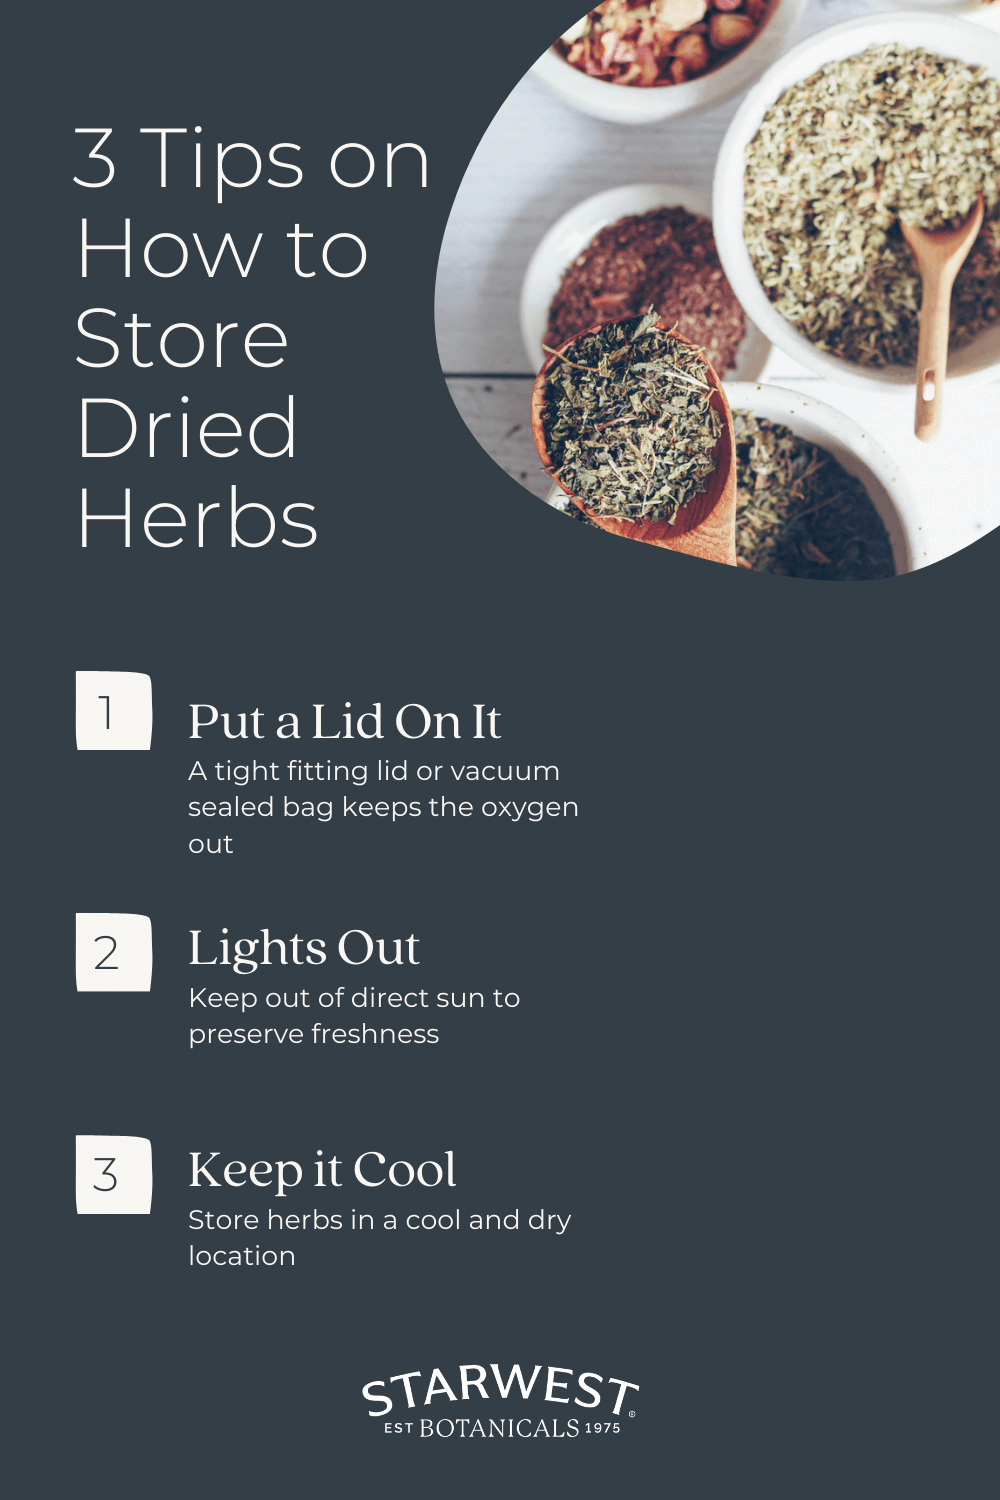 https://www.starwest-botanicals.com/product_images/uploaded_images/3-tips-on-store-dried-herbs2.png